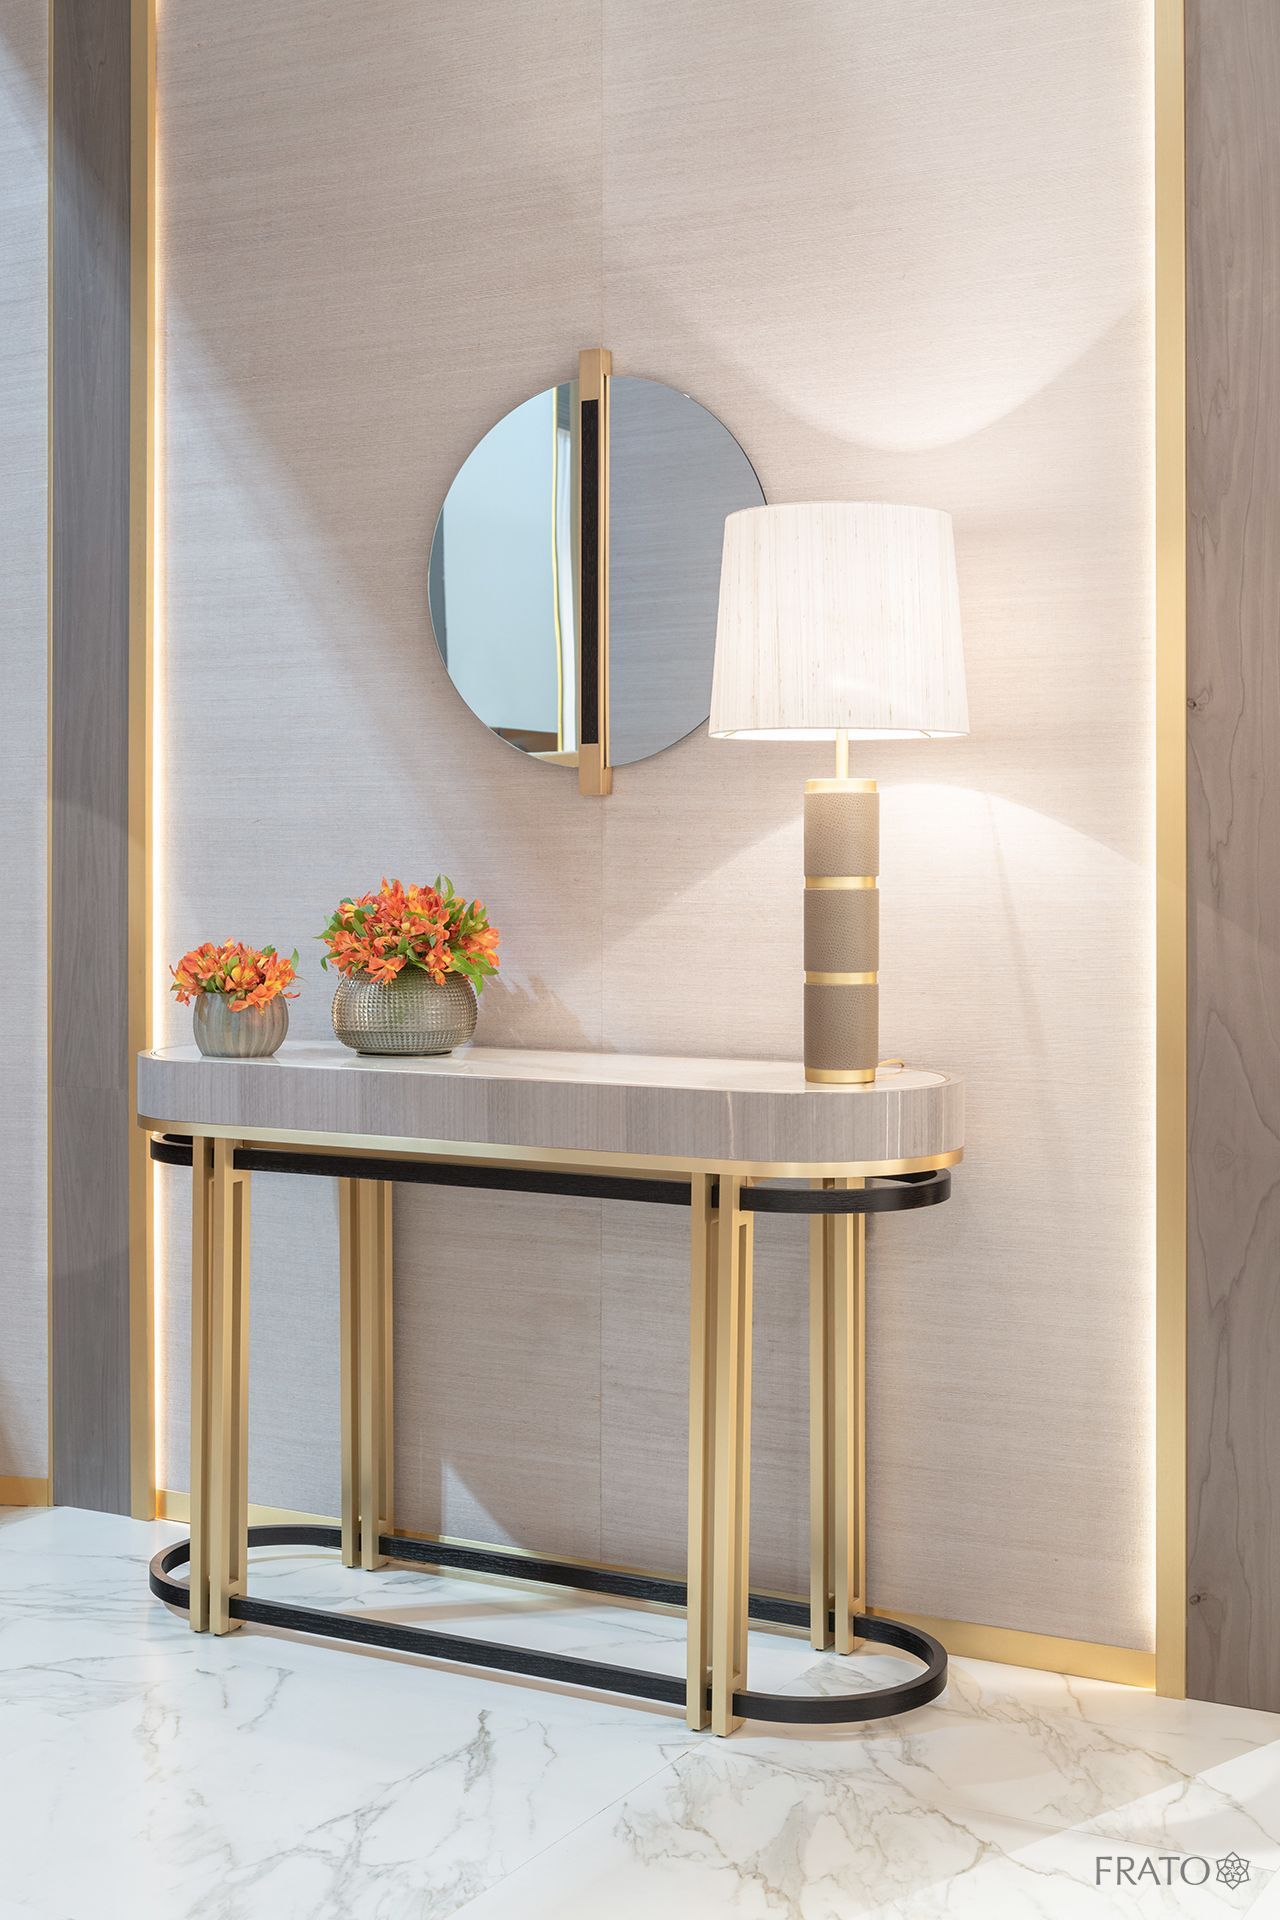 Frato's New Collection At @isaloni 2019! | Contemporary Inside 2 Piece Modern Nesting Console Tables (View 7 of 20)